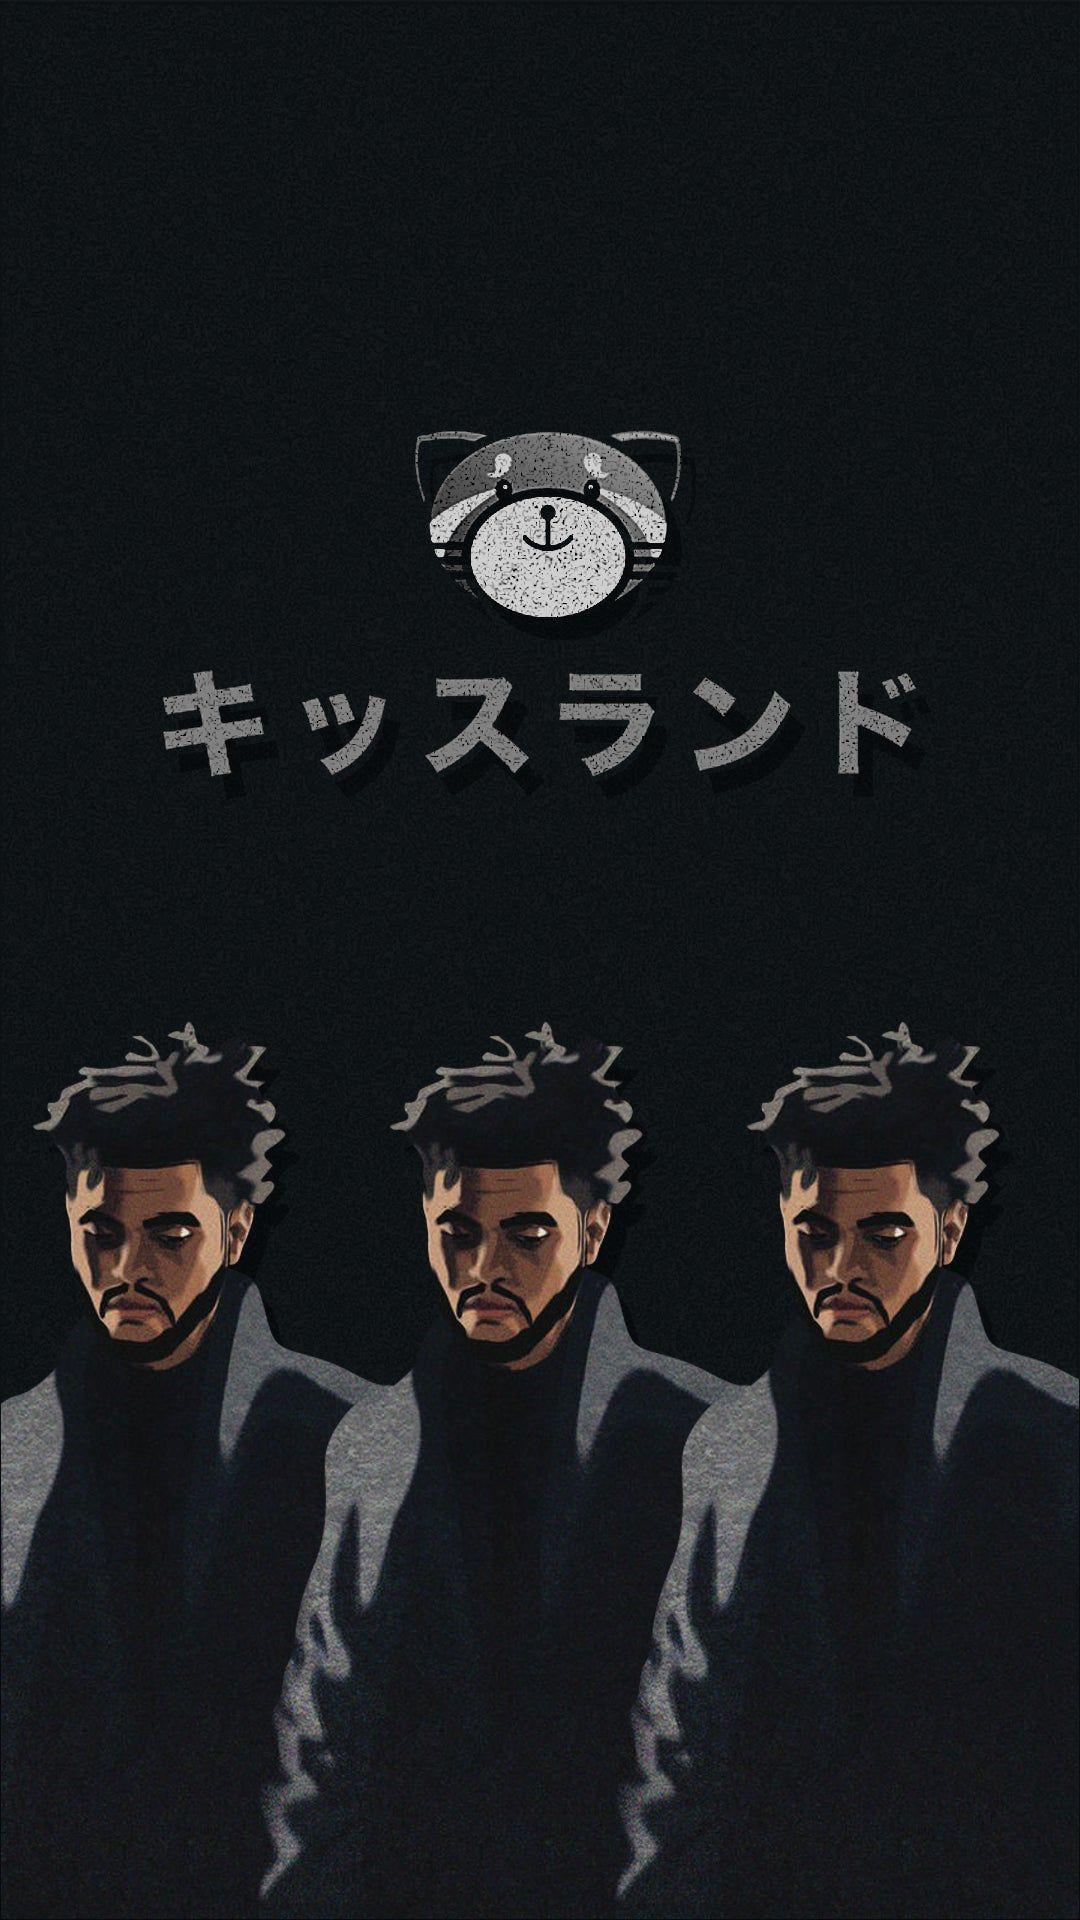 The Weeknd Phone Wallpapers - Top Free The Weeknd Phone Backgrounds ...